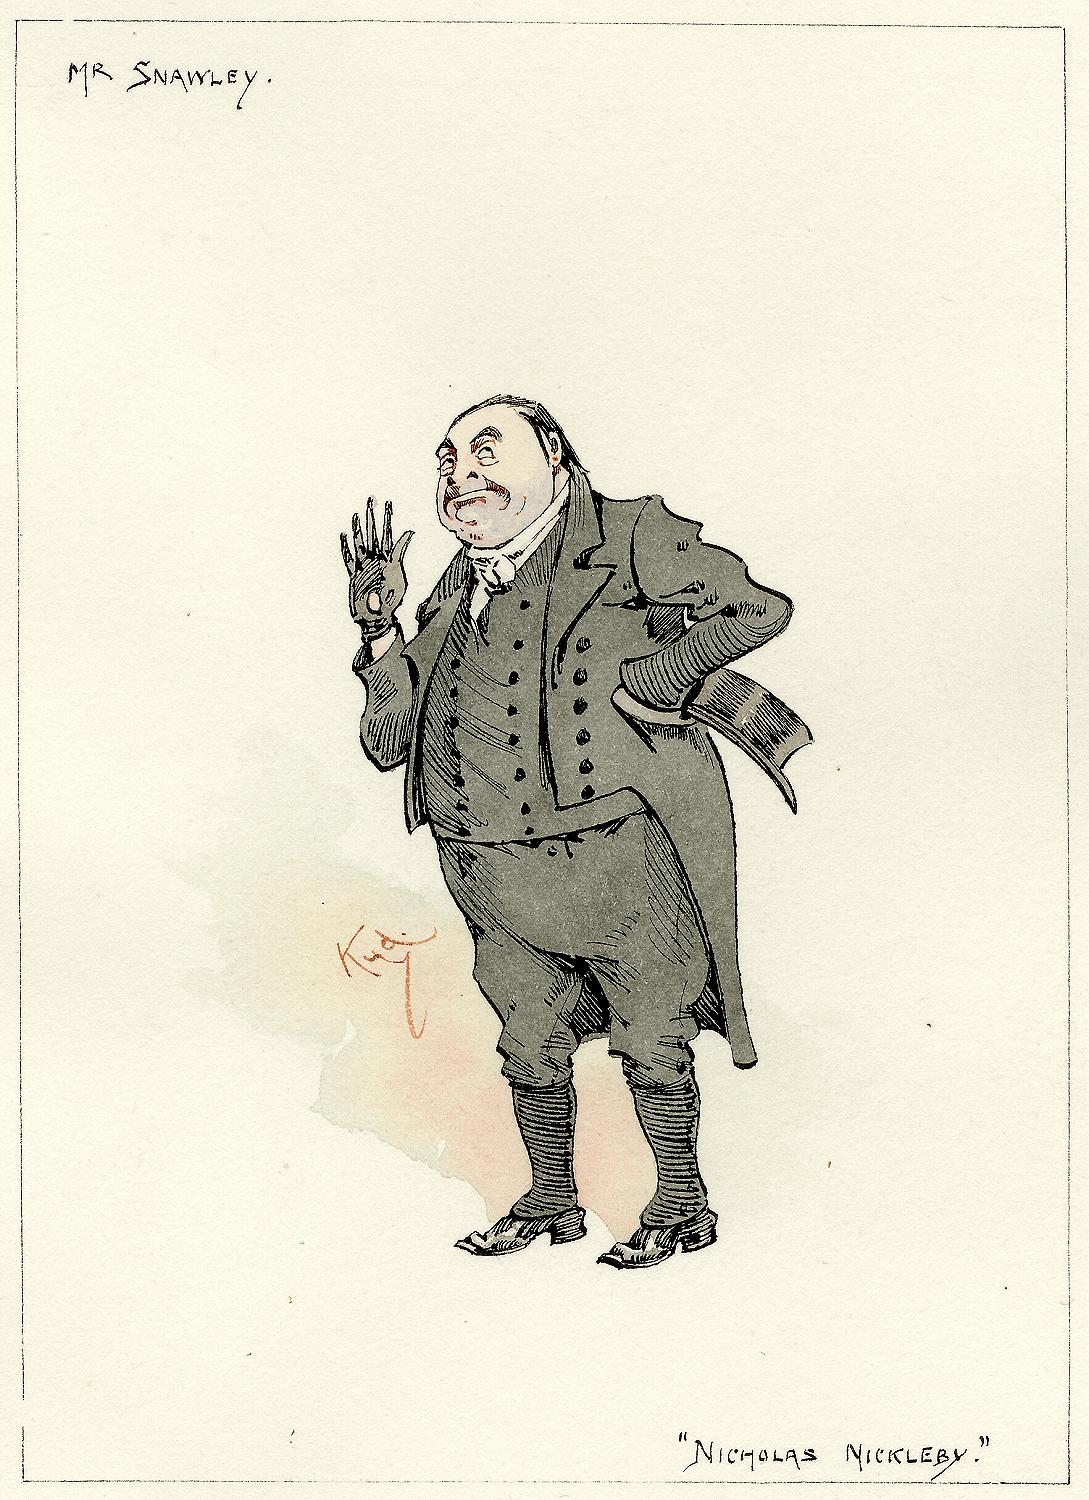 AUTHOR: CLARKE, Joseph Clayton (KYD) (Charles Dickens). 

TITLE: Mr. Snawley (from Nicholas Nickleby)

PUBLISHER: England, [c. 1920]

DESCRIPTION: ORIGINAL INK AND WATERCOLOR SKETCH. 1 leaf, on paper, image 5-15/16